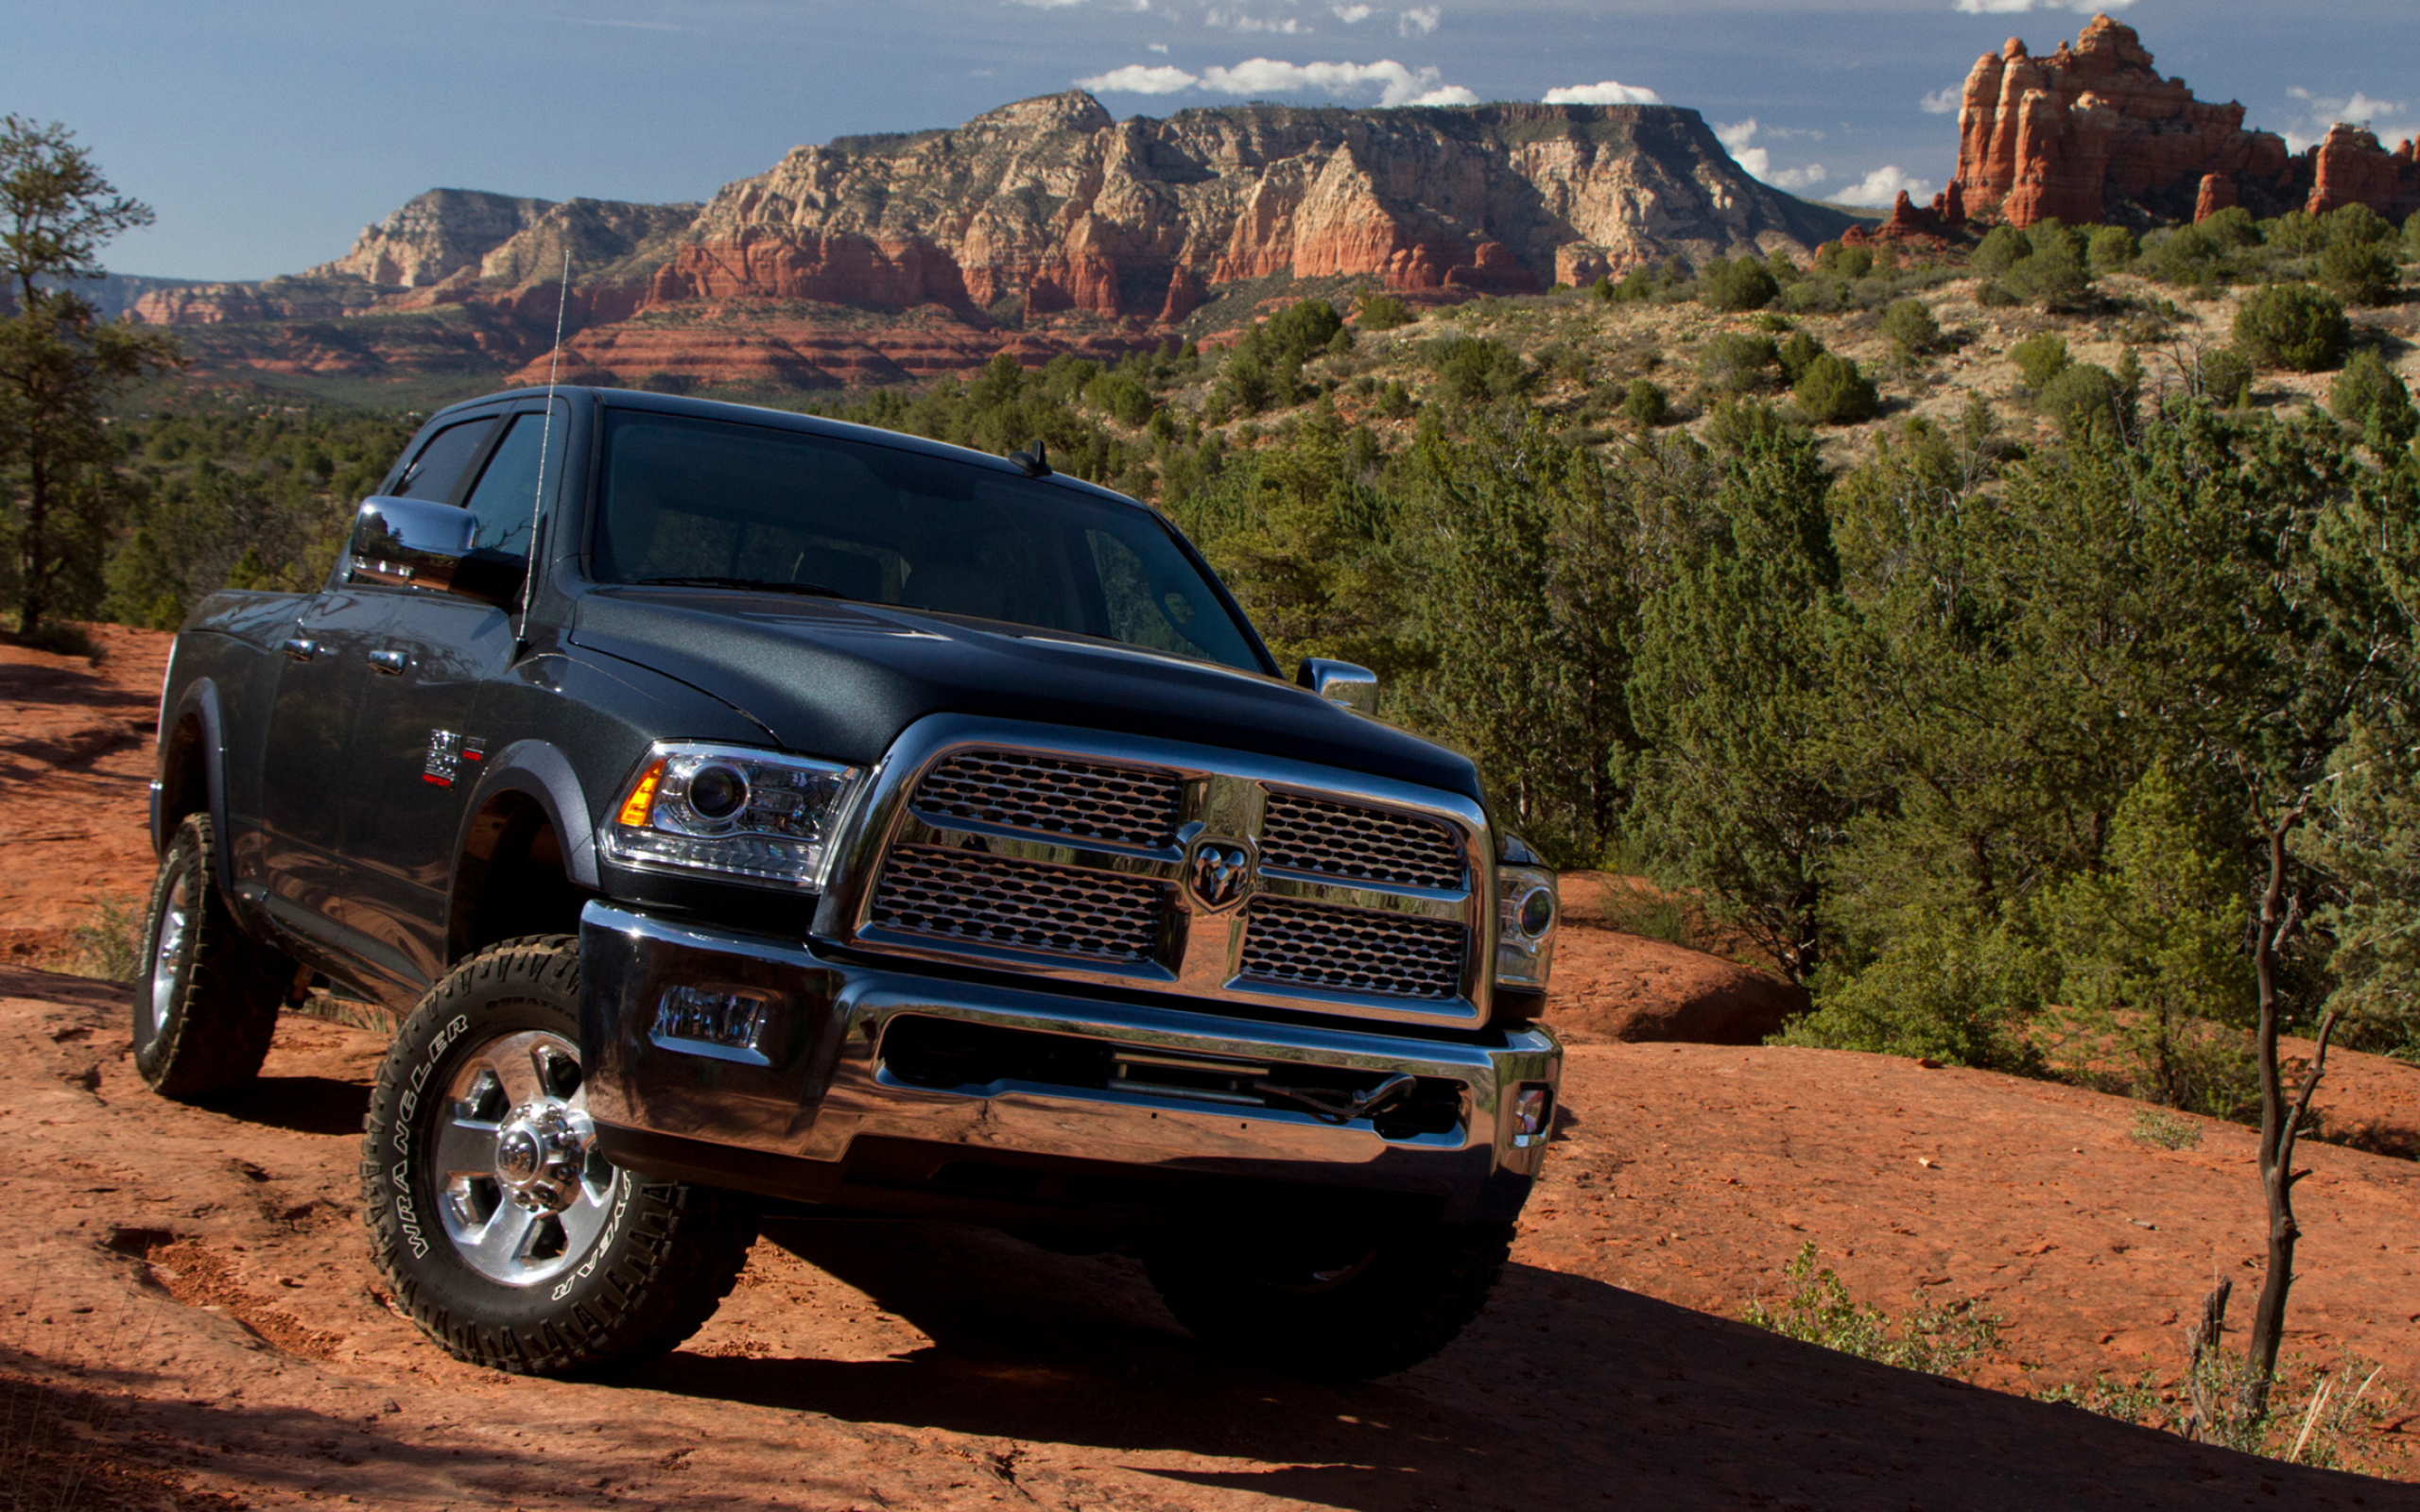 Ram 3500, Powerful workhorse, Reliable and robust, Heavy-duty truck, 2560x1600 HD Desktop